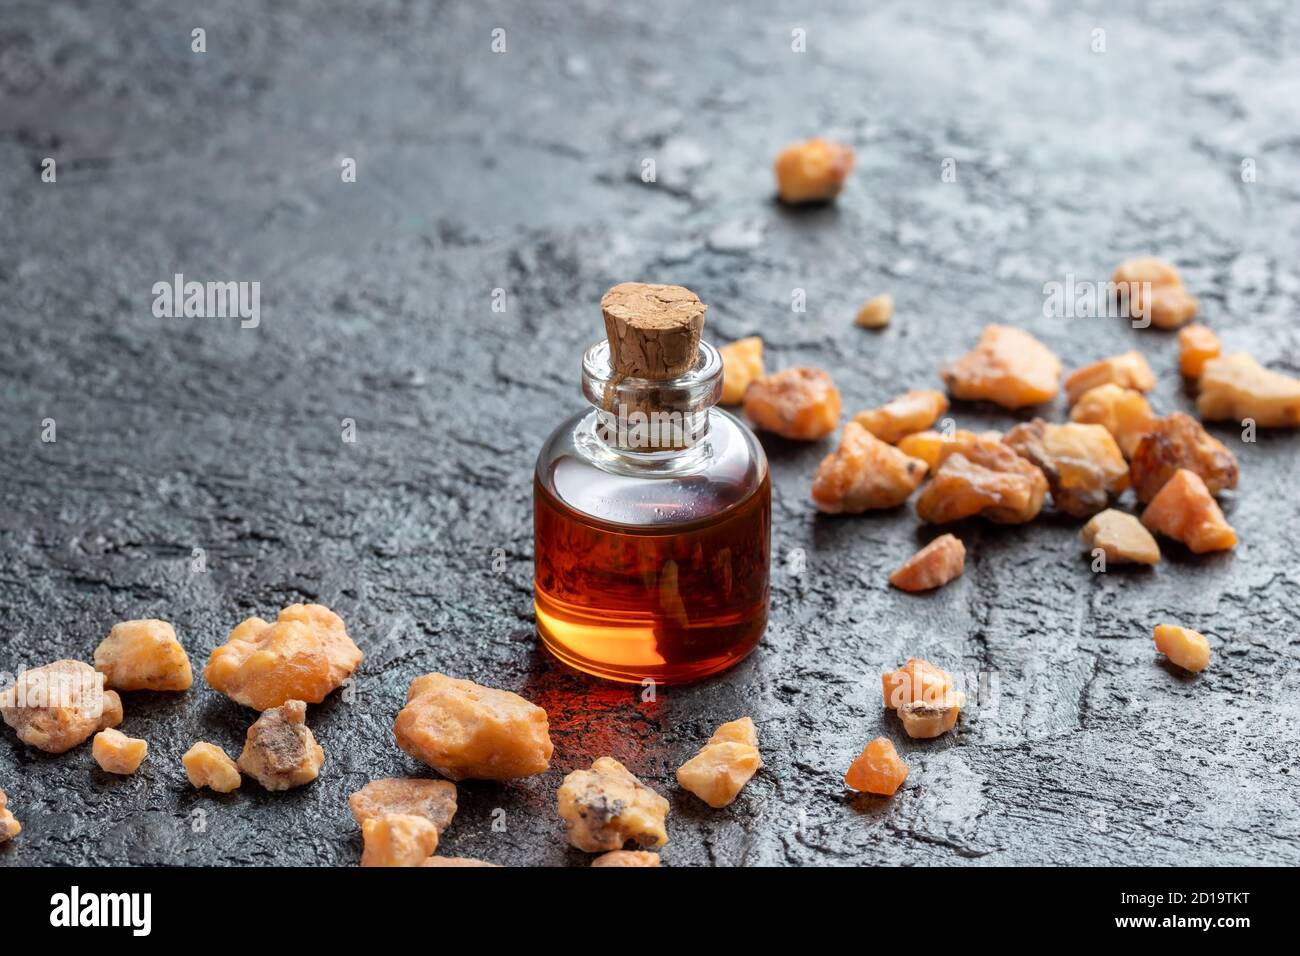 A bottle of styrax benzoin essential oil and resin Stock Photo